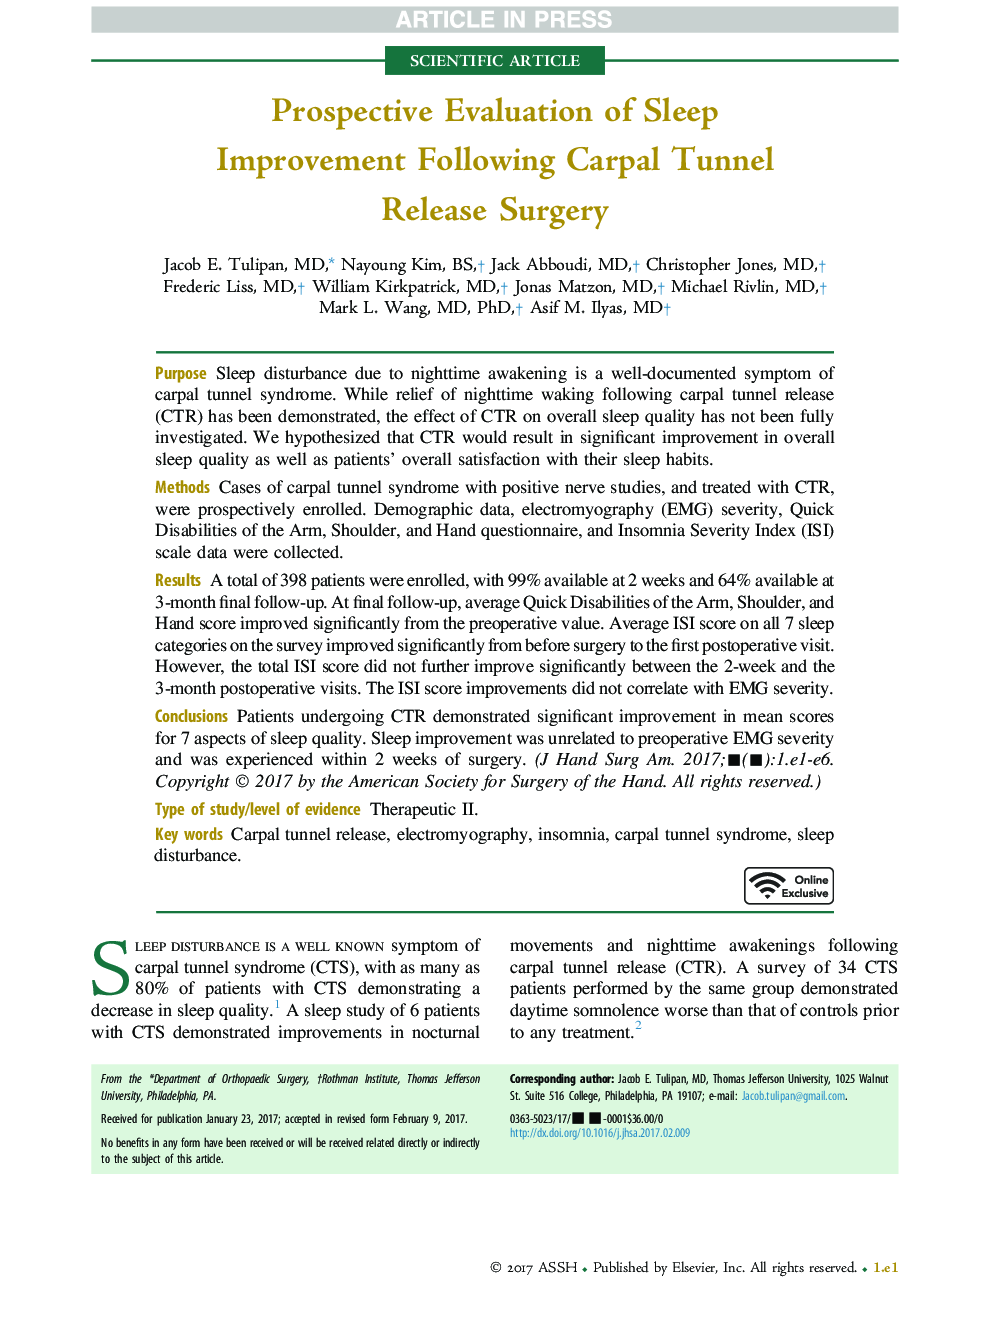 Prospective Evaluation of Sleep Improvement Following Carpal Tunnel Release Surgery